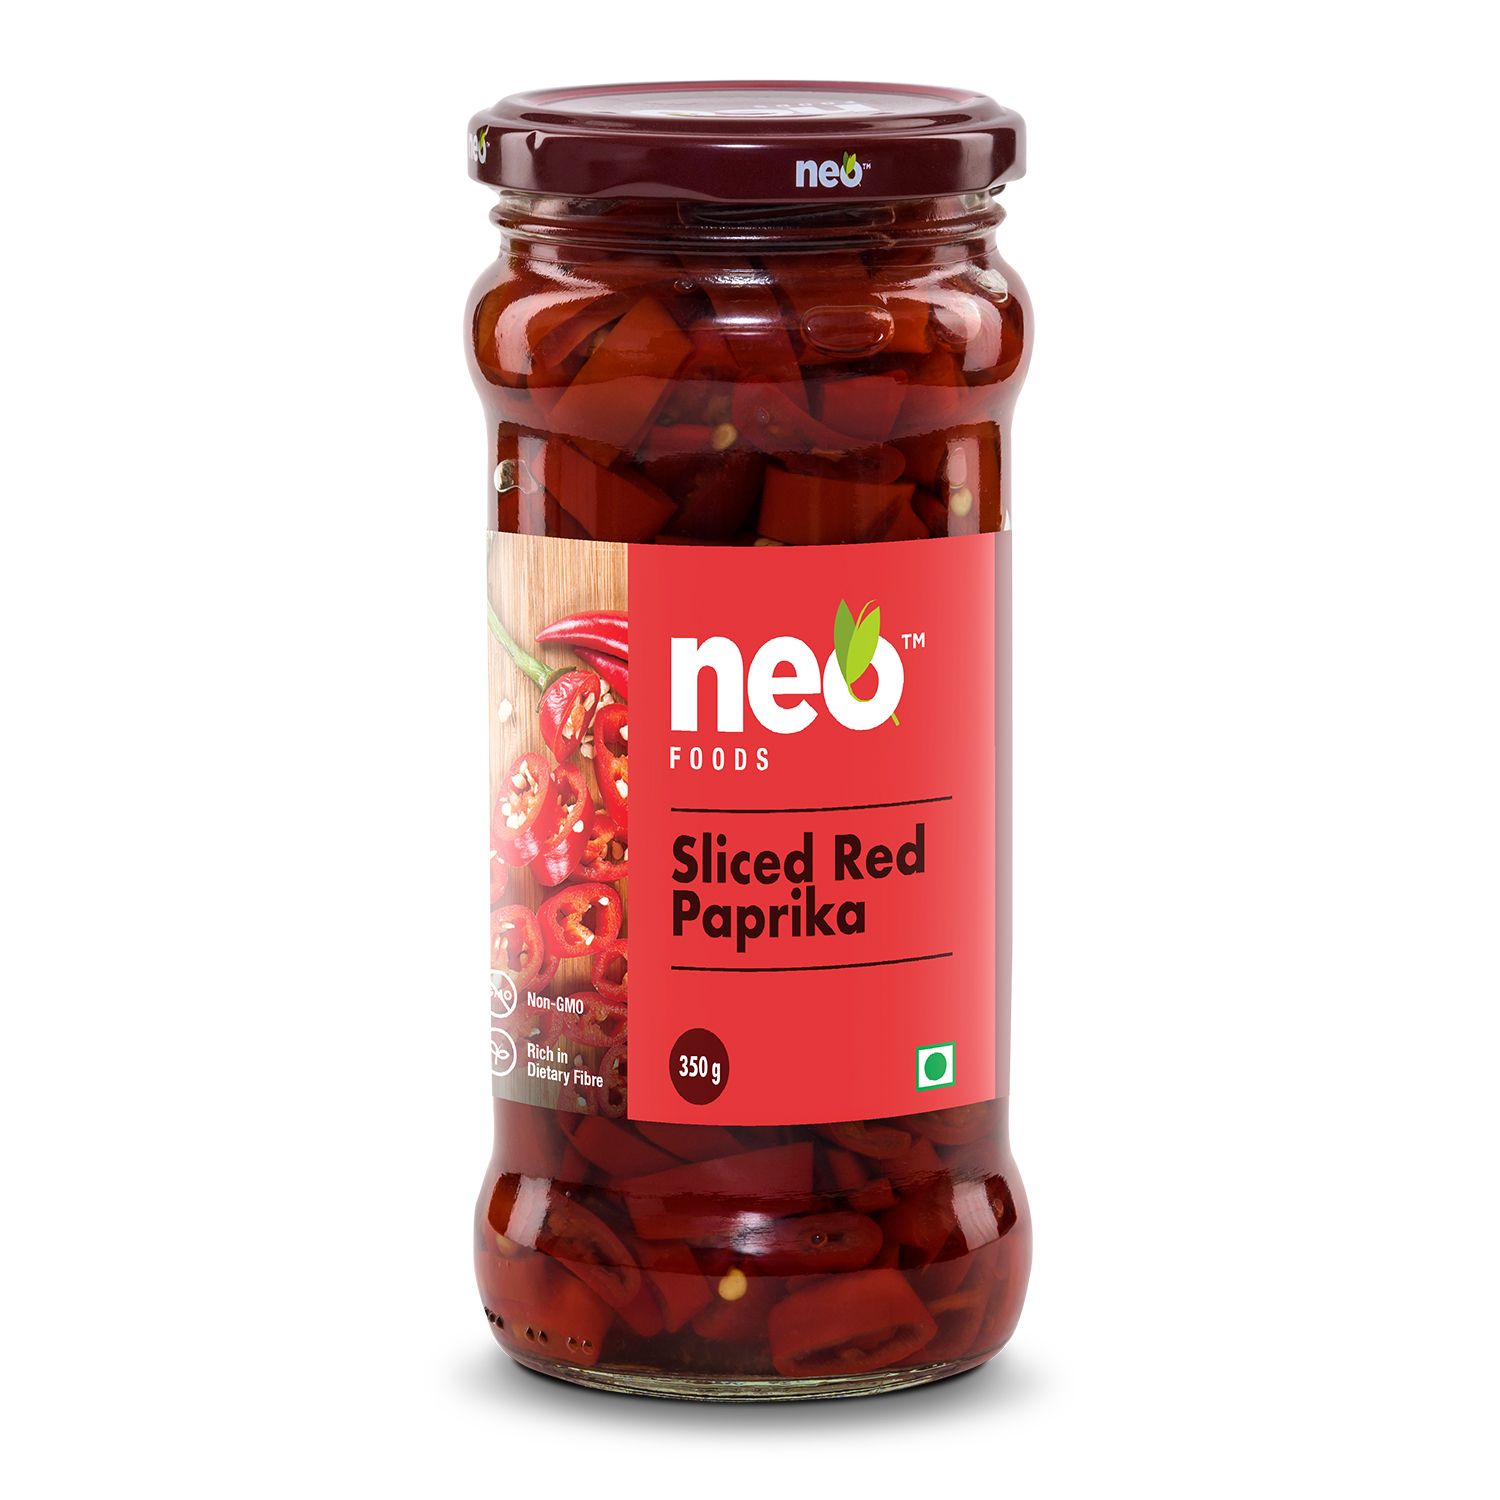 Neo Sliced Red Paprika 350g I 100% Vegan I Ready-to-Eat Fibre-Rich Topping for Pizza, Pasta, Burger, Snacks and Salads I Non-GMO I Glass Jar I